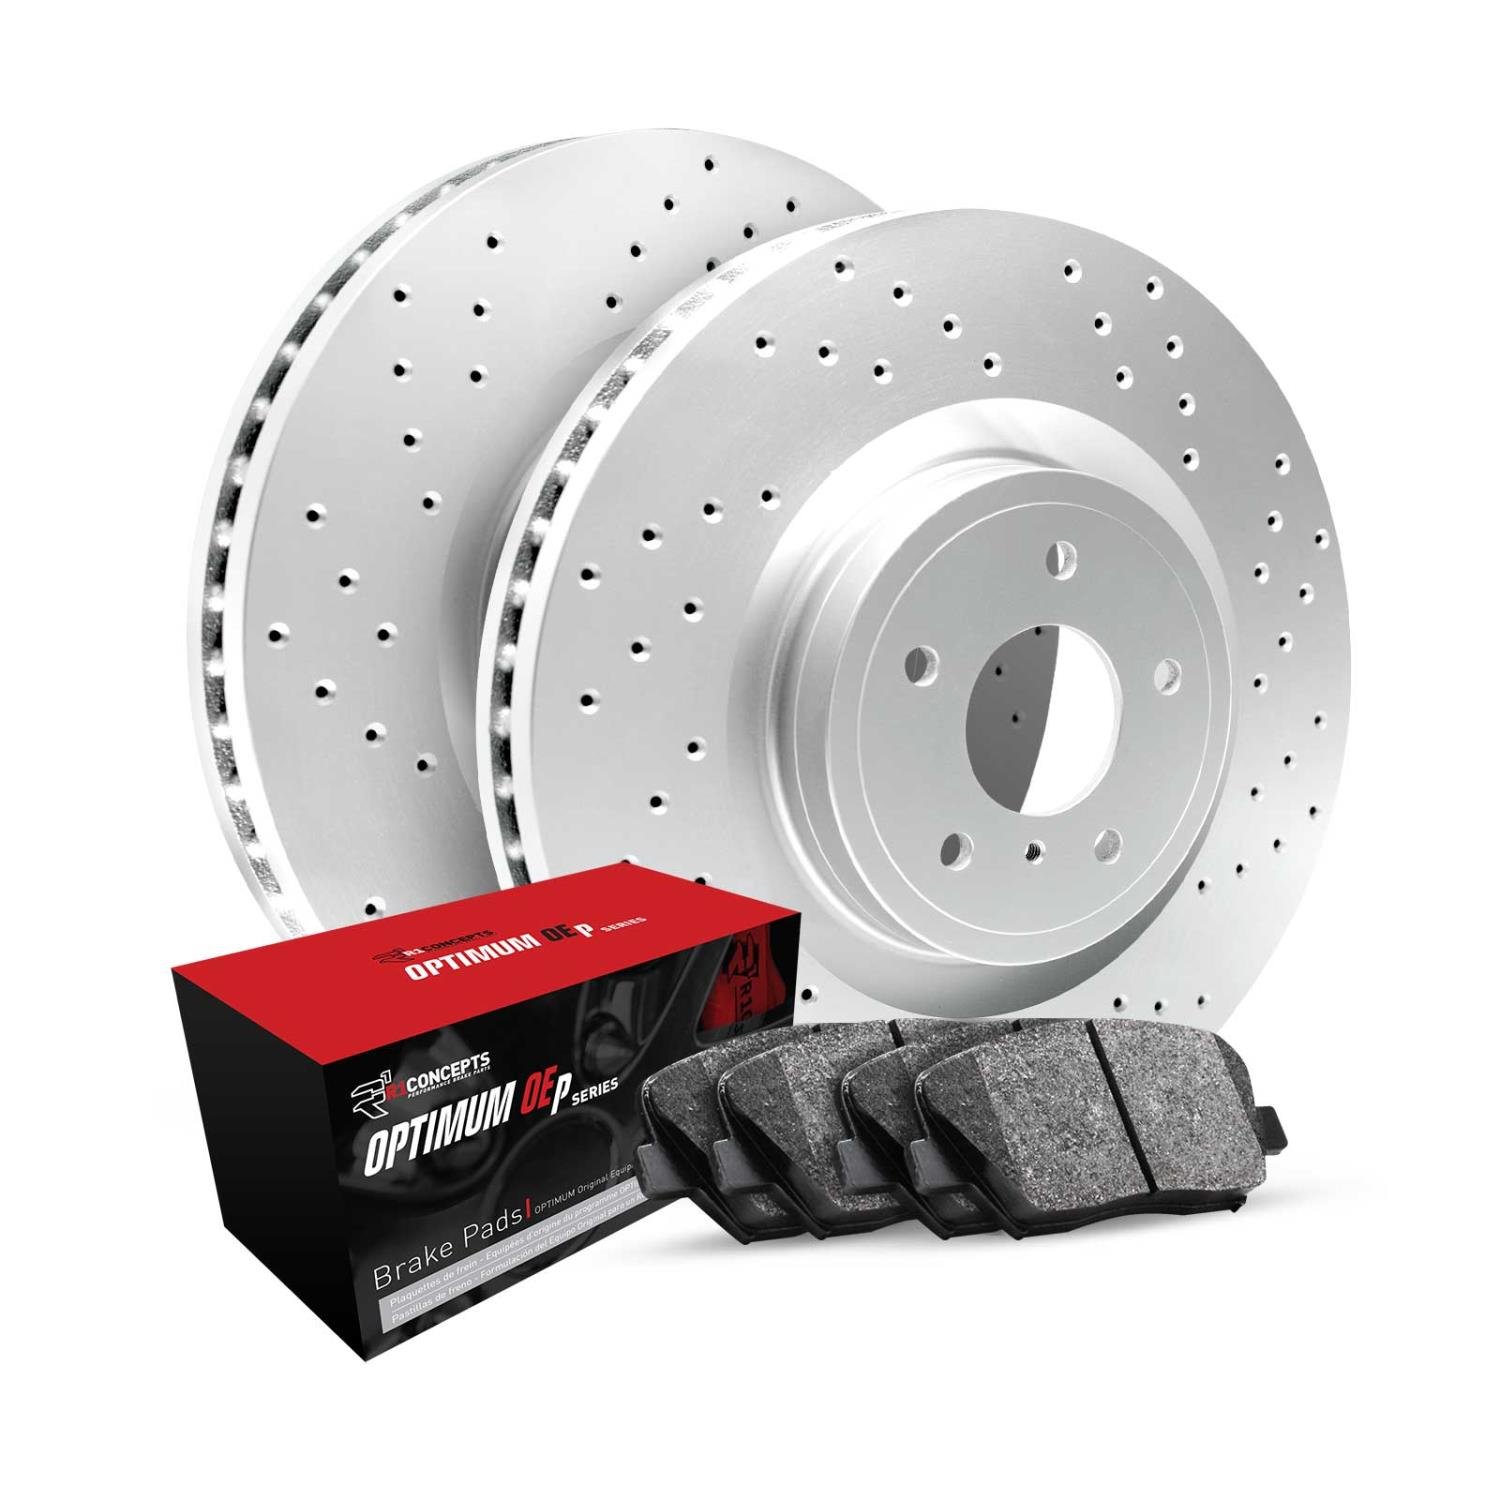 GEO-Carbon Drilled Brake Rotor Set w/Optimum OE Pads, 1996-2008 Fits Multiple Makes/Models, Position: Front